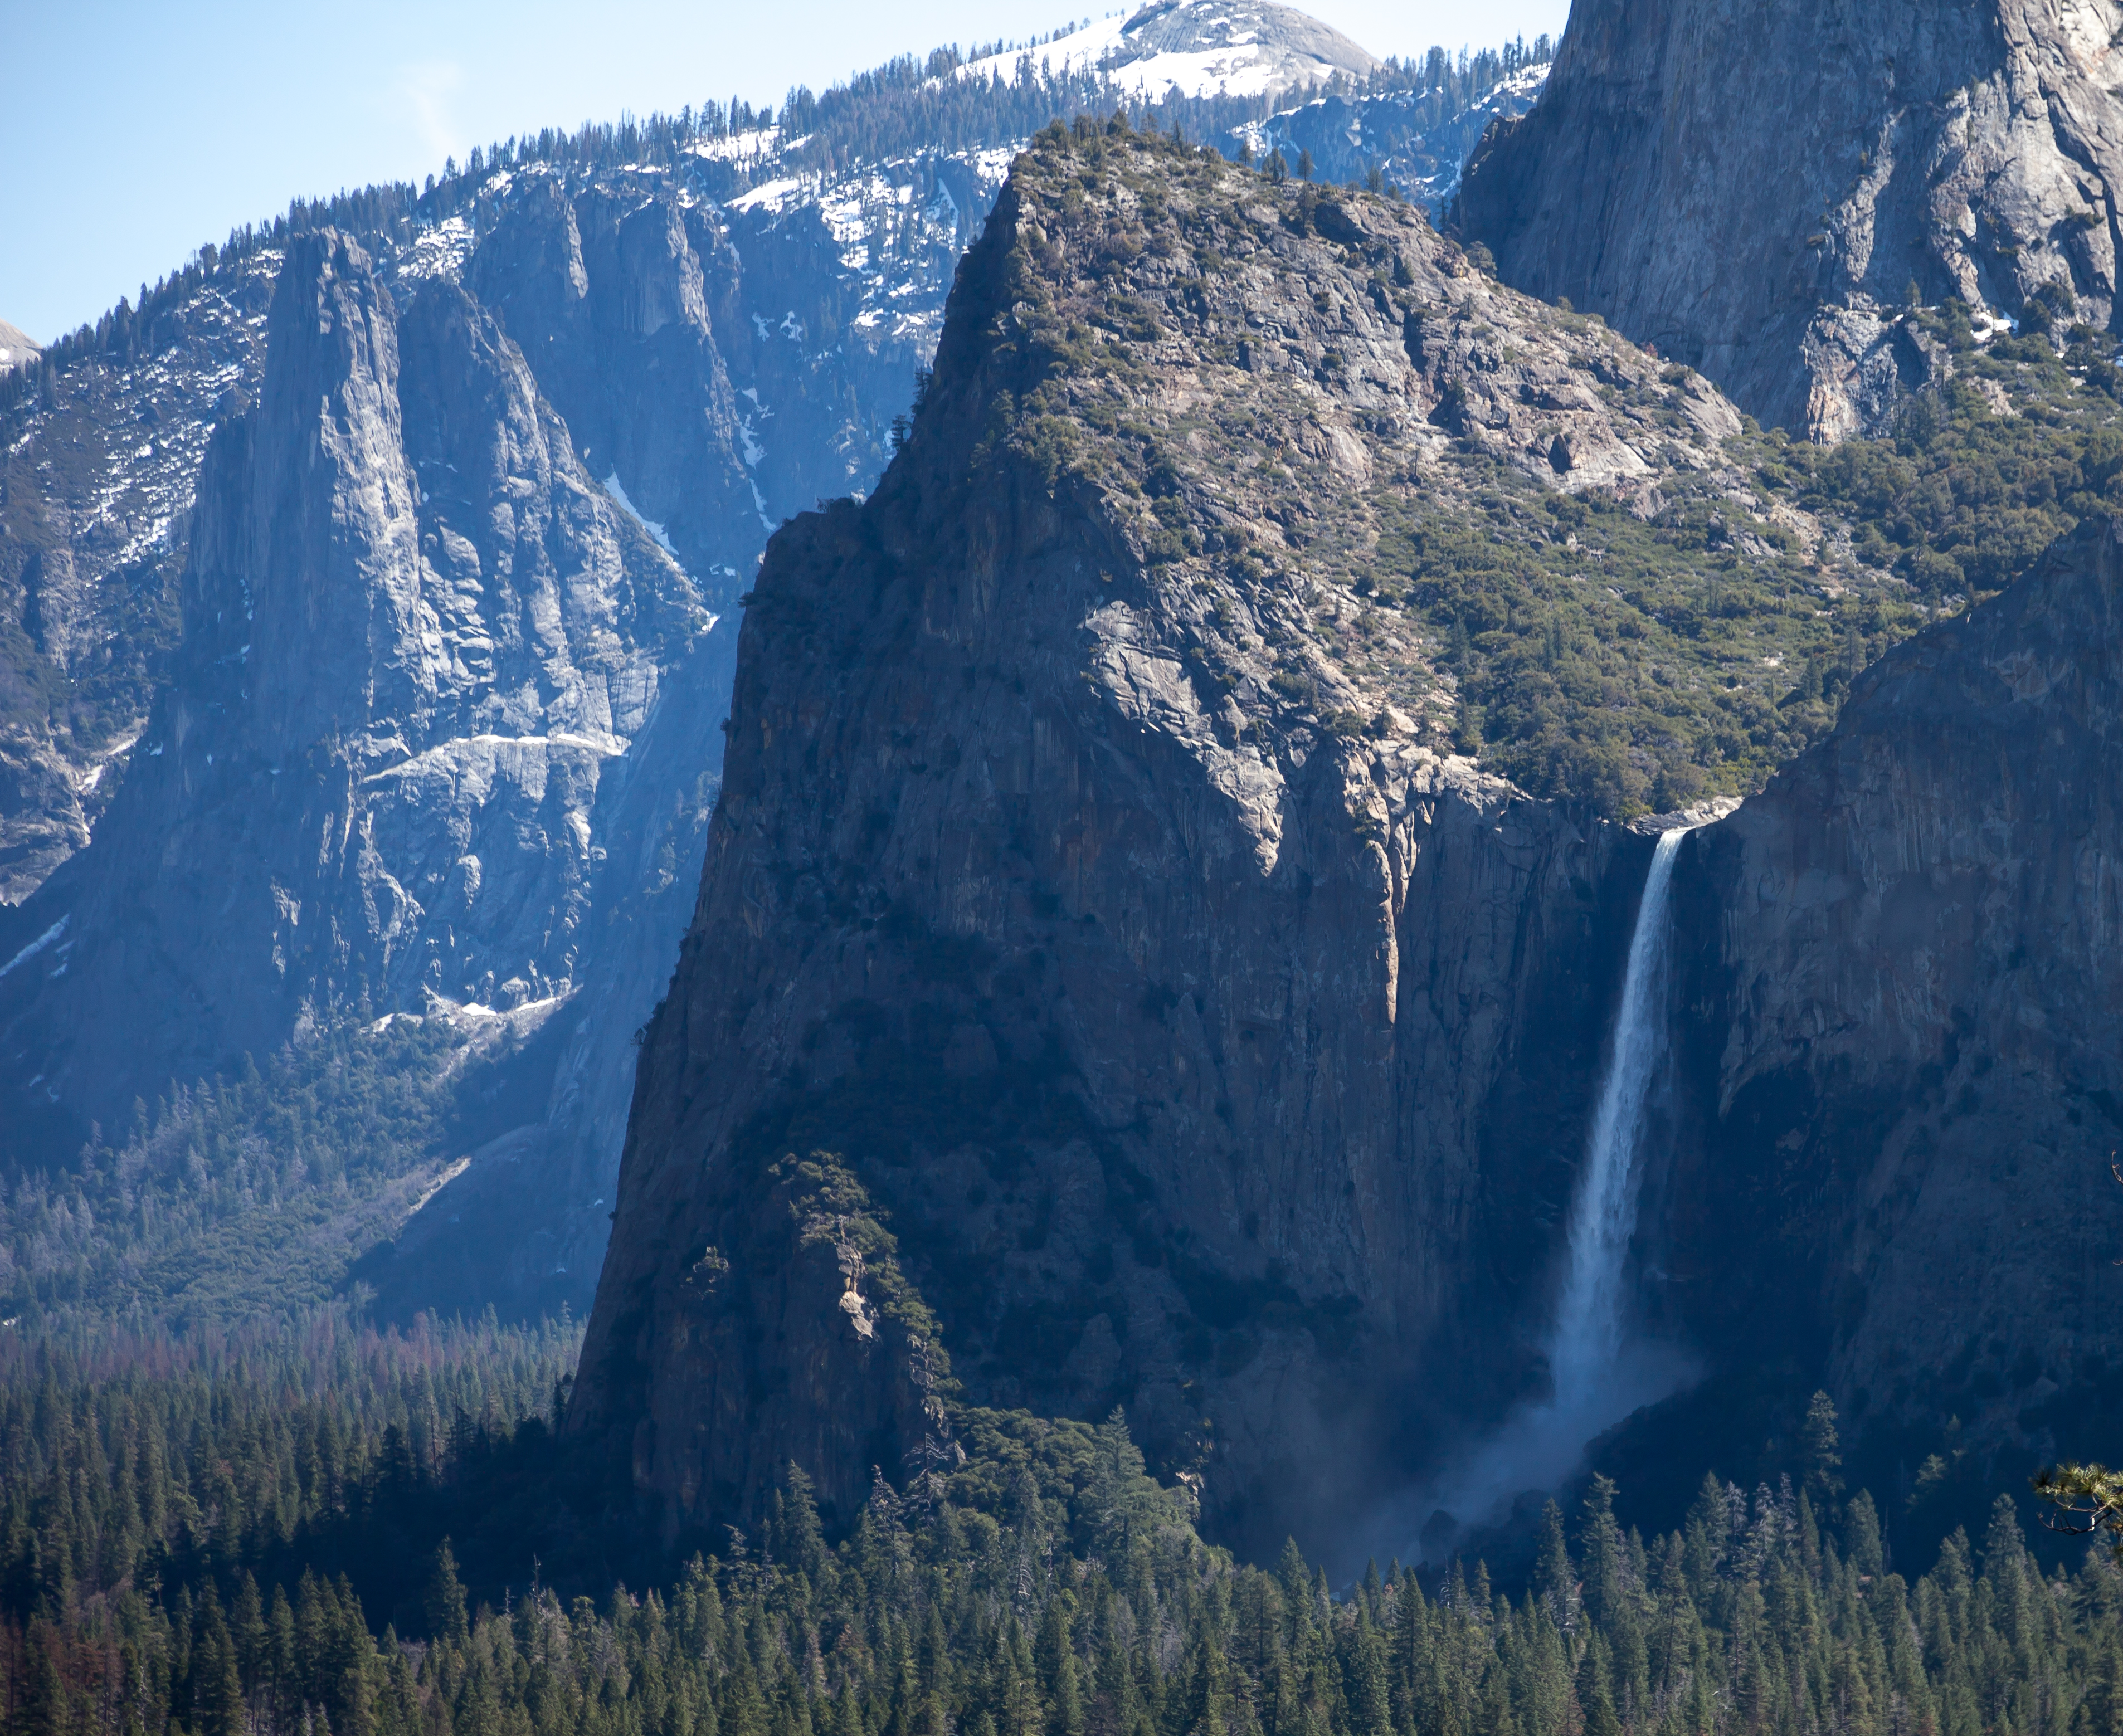 a view of Bridalveil Fall from a distance